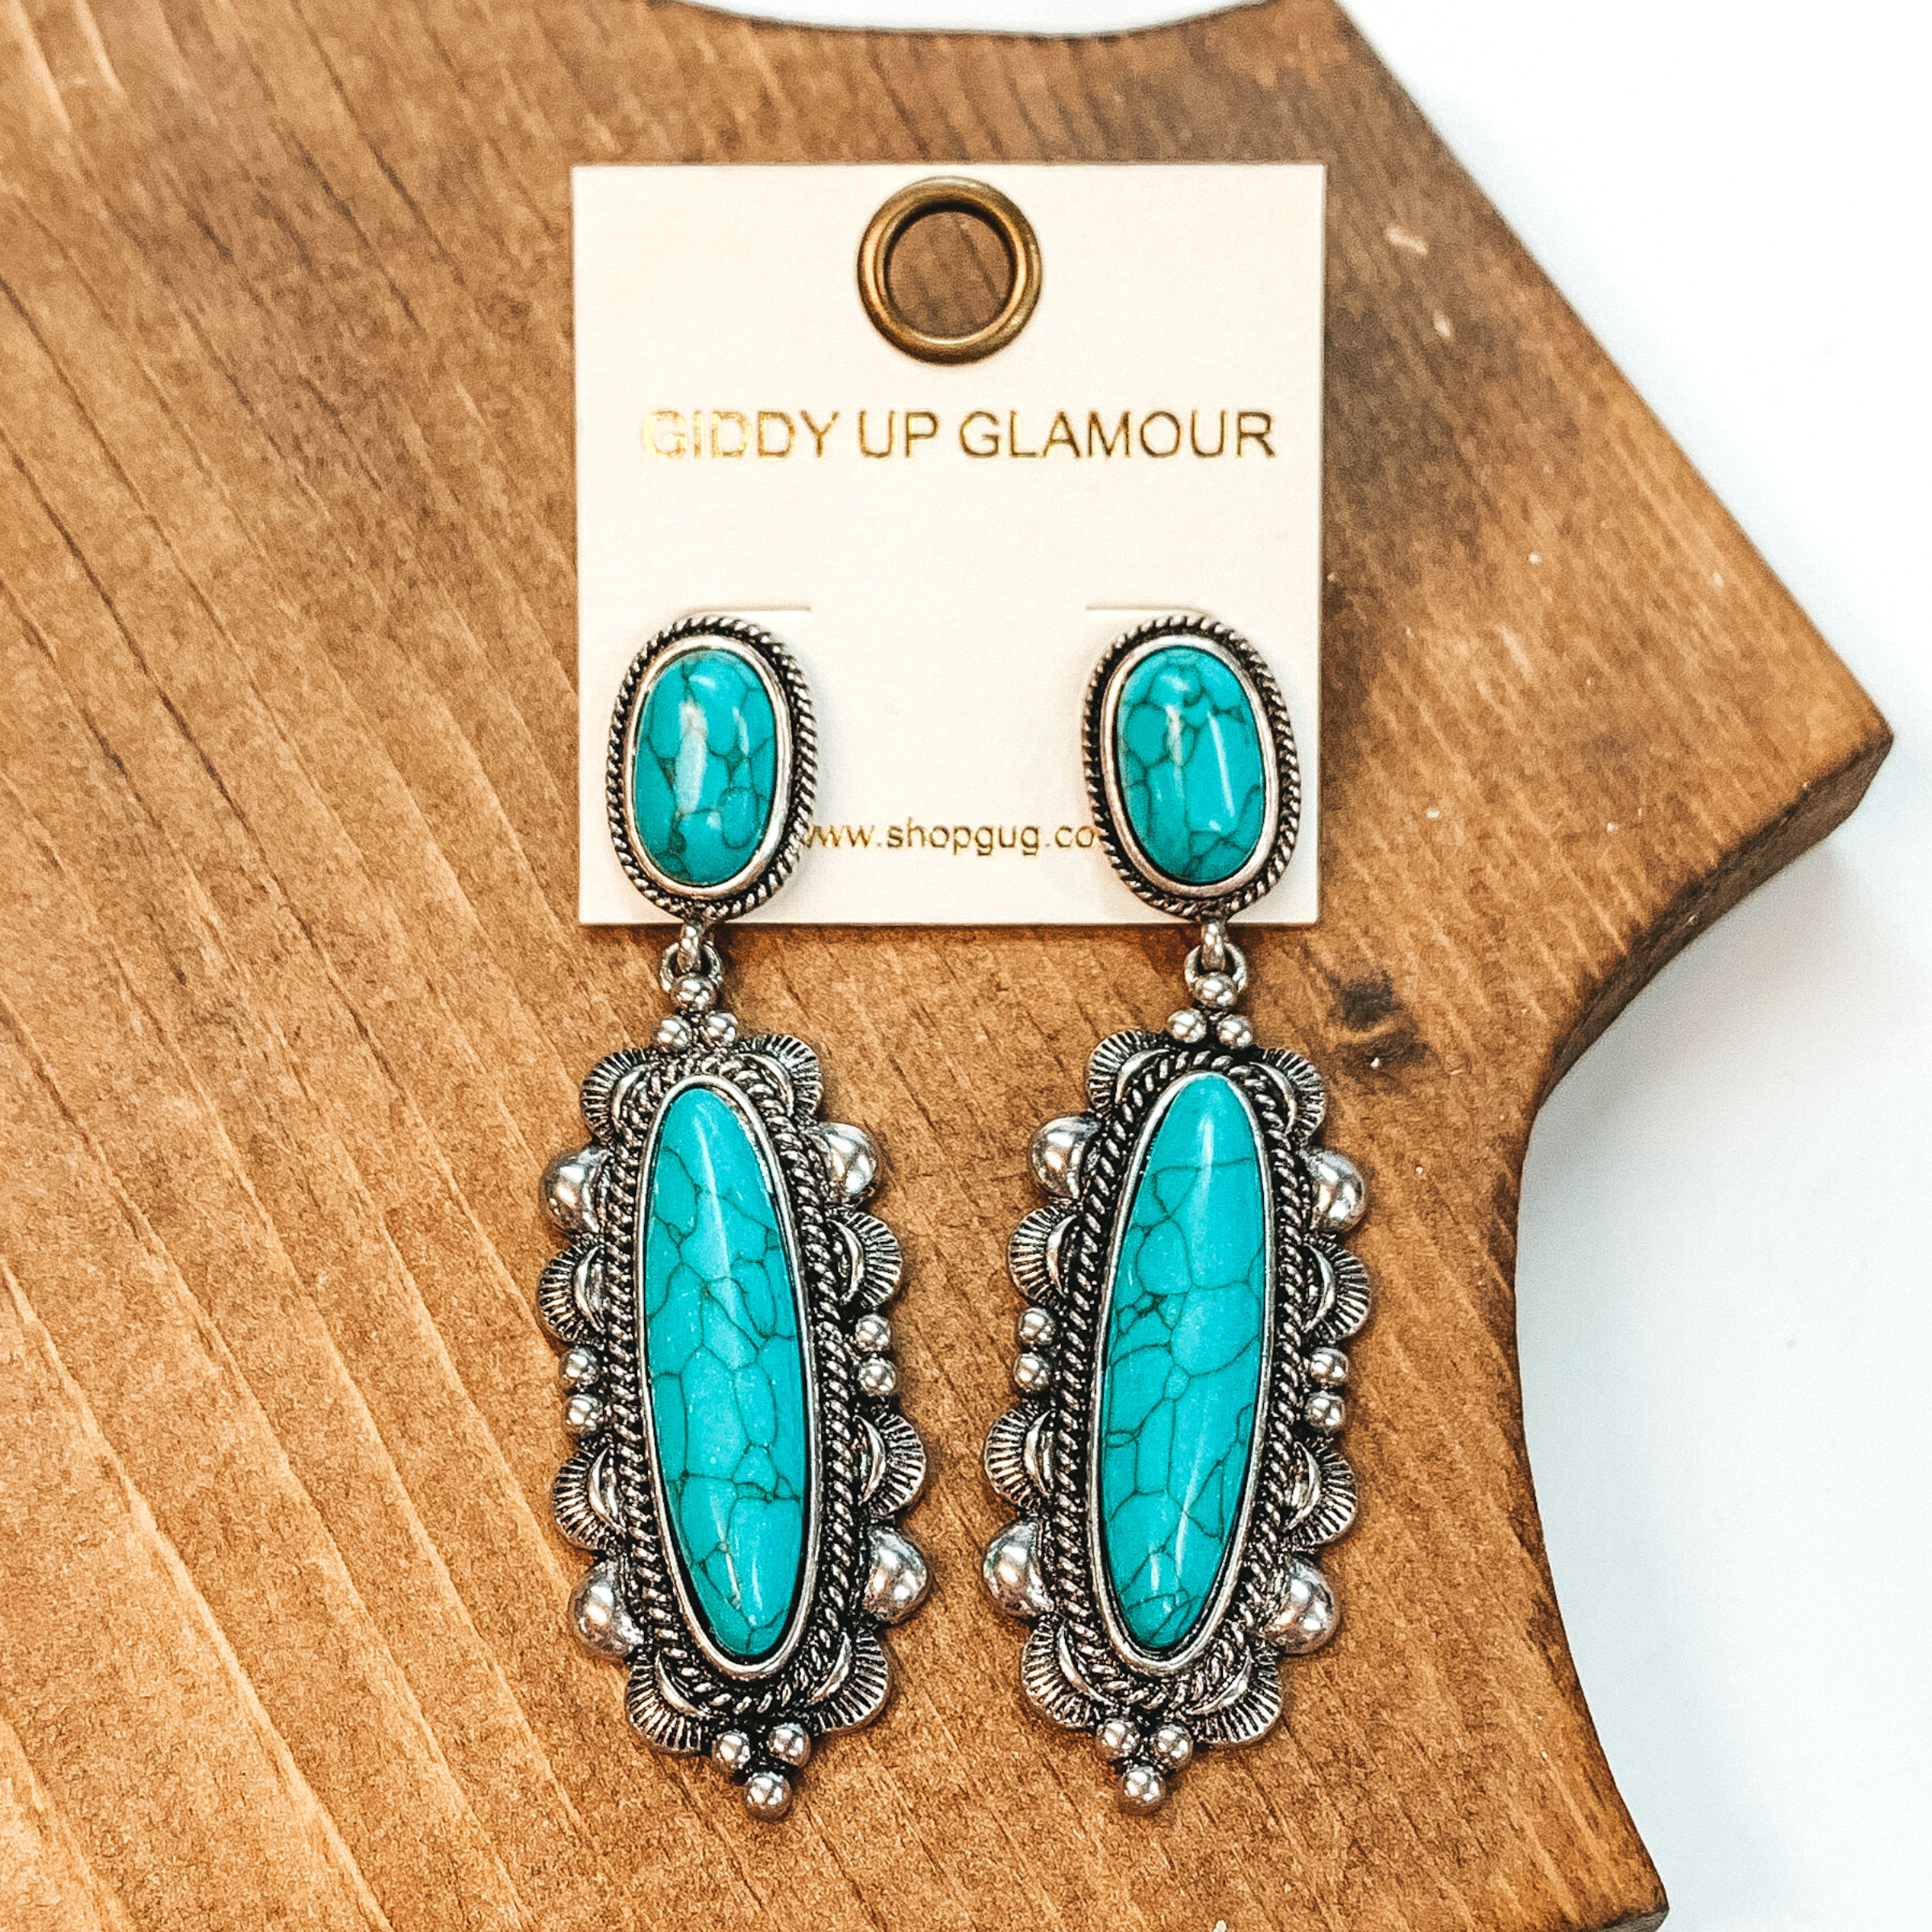 Turquoise, oval post back earrings with a silver outline. At the bottom of the earrings is a oval pendant. The center has an oval, turquoise stone with aa western, silver outline. These earrings are pictured laying on a brown block on a white background.